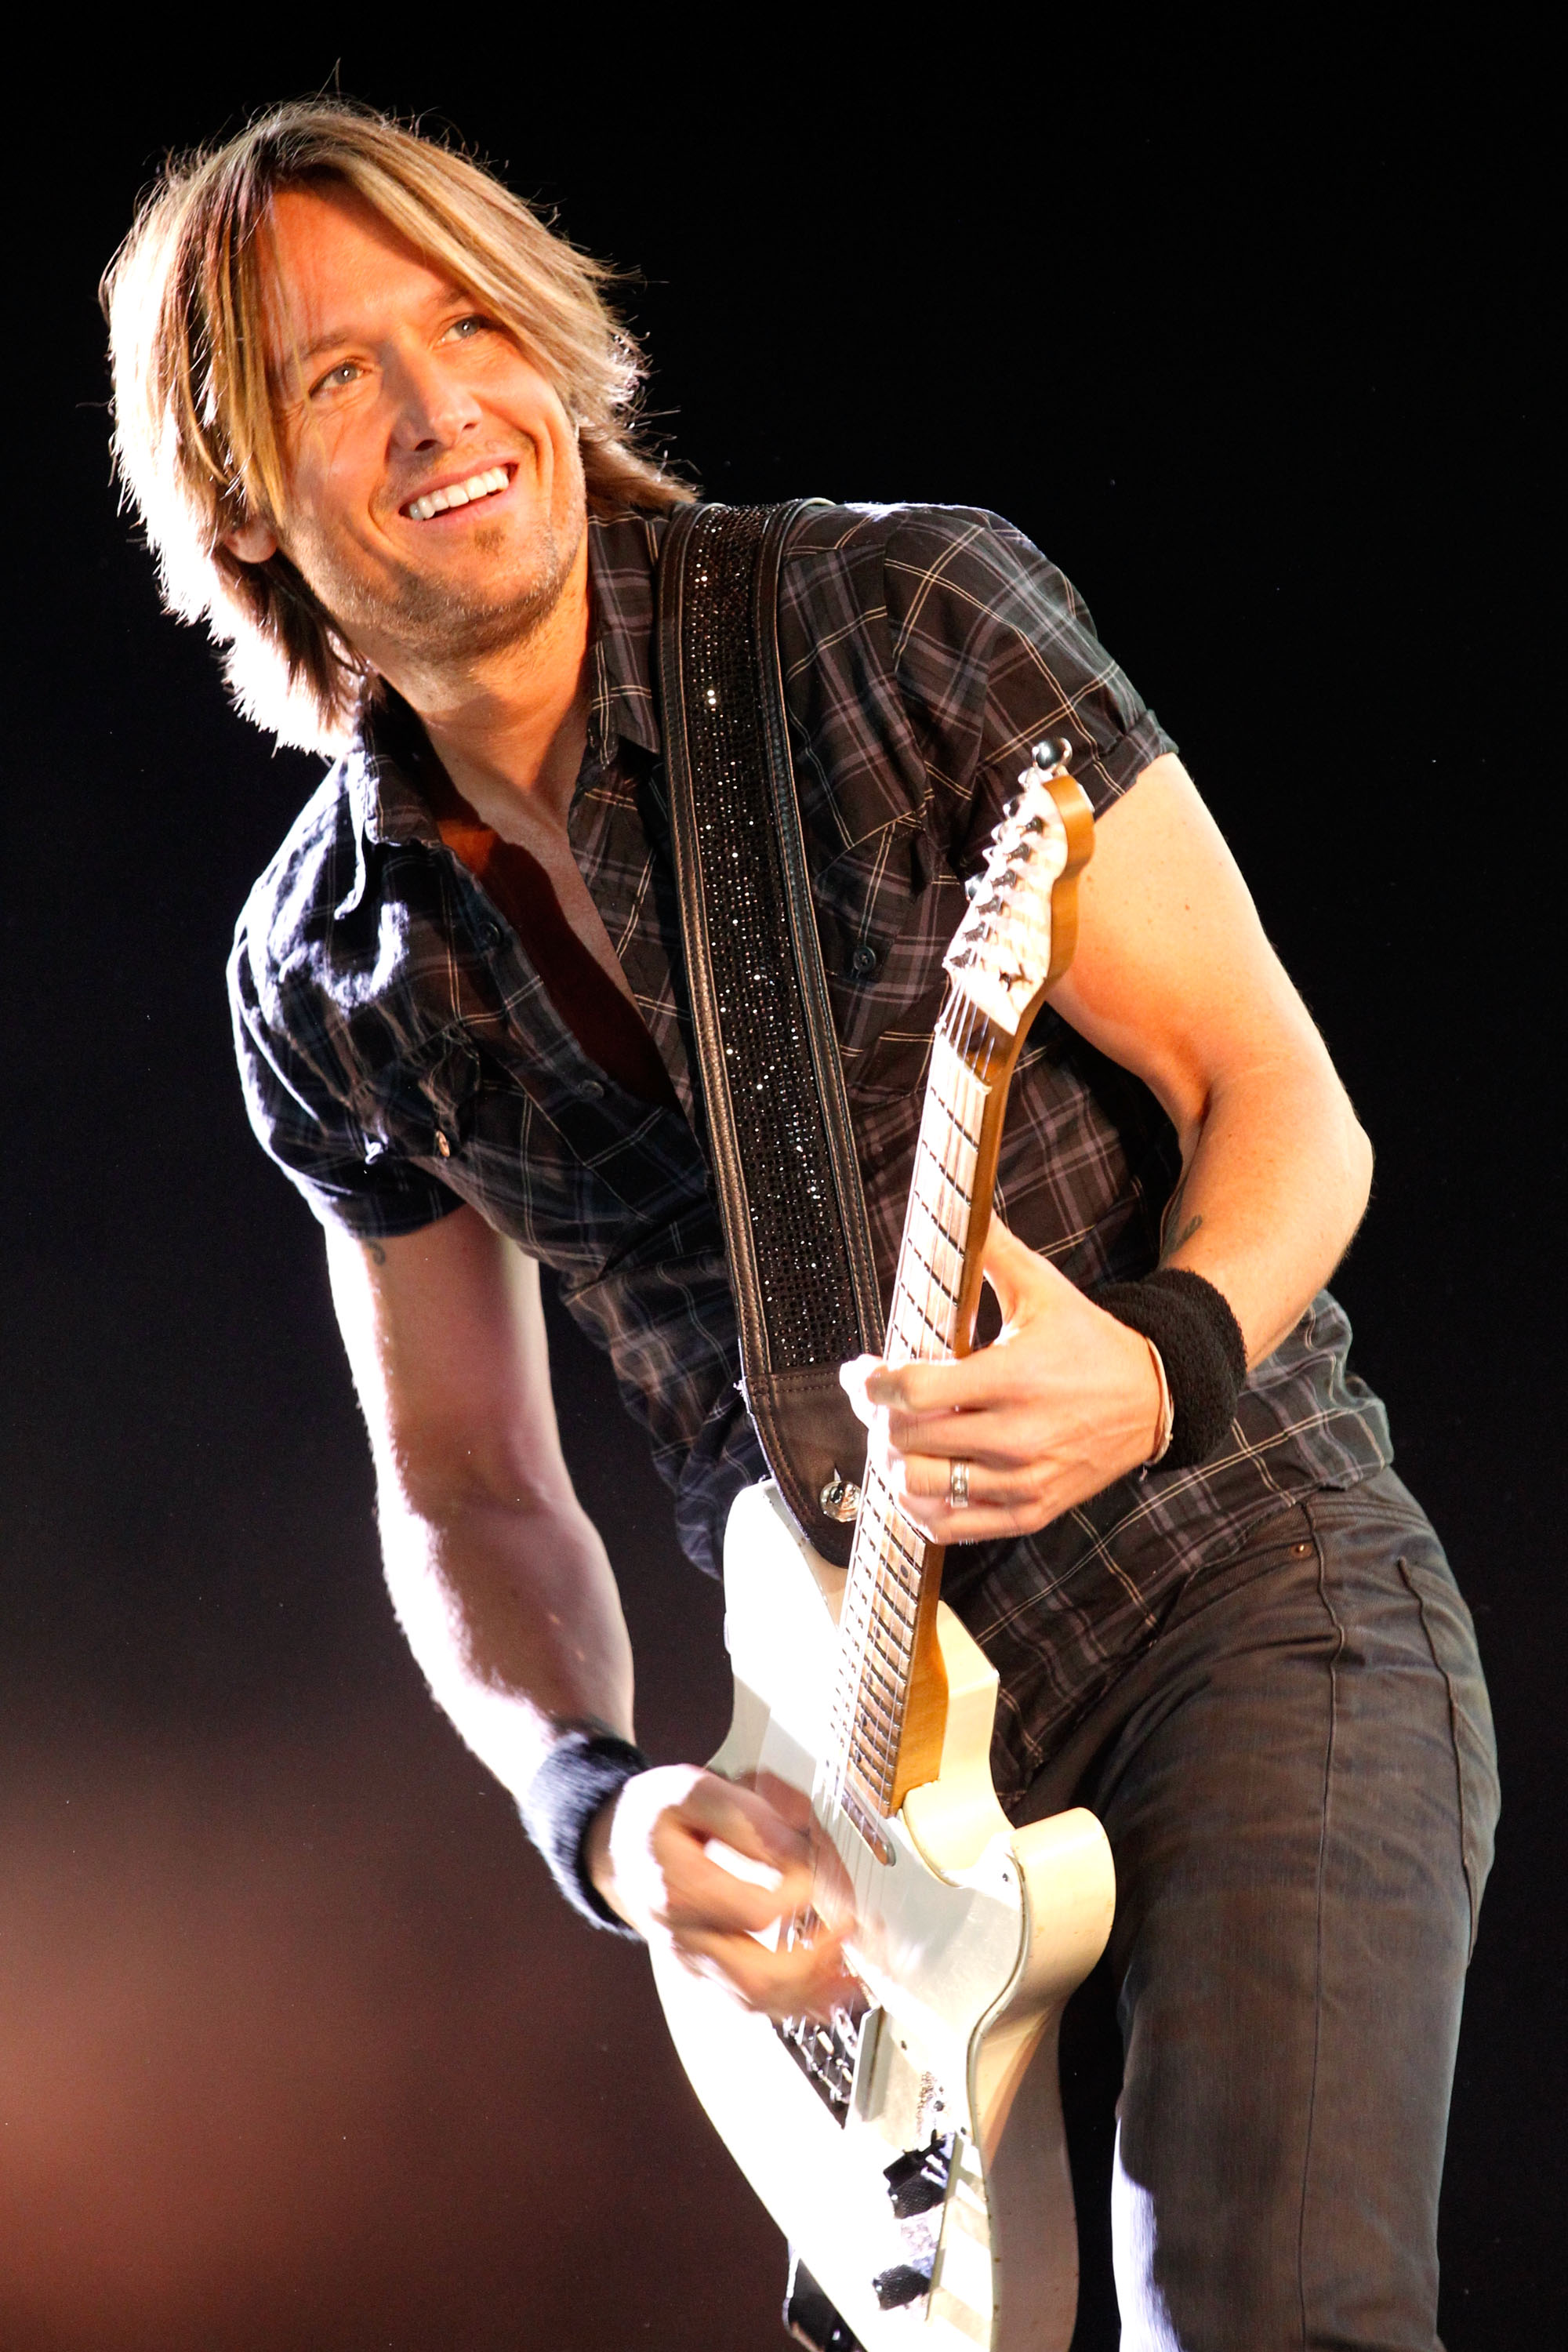 Keith Urban performs during day 1 of Stagecoach: California's Country Music Festival in Indio, California, on April 24, 2010. | Source: Getty Images